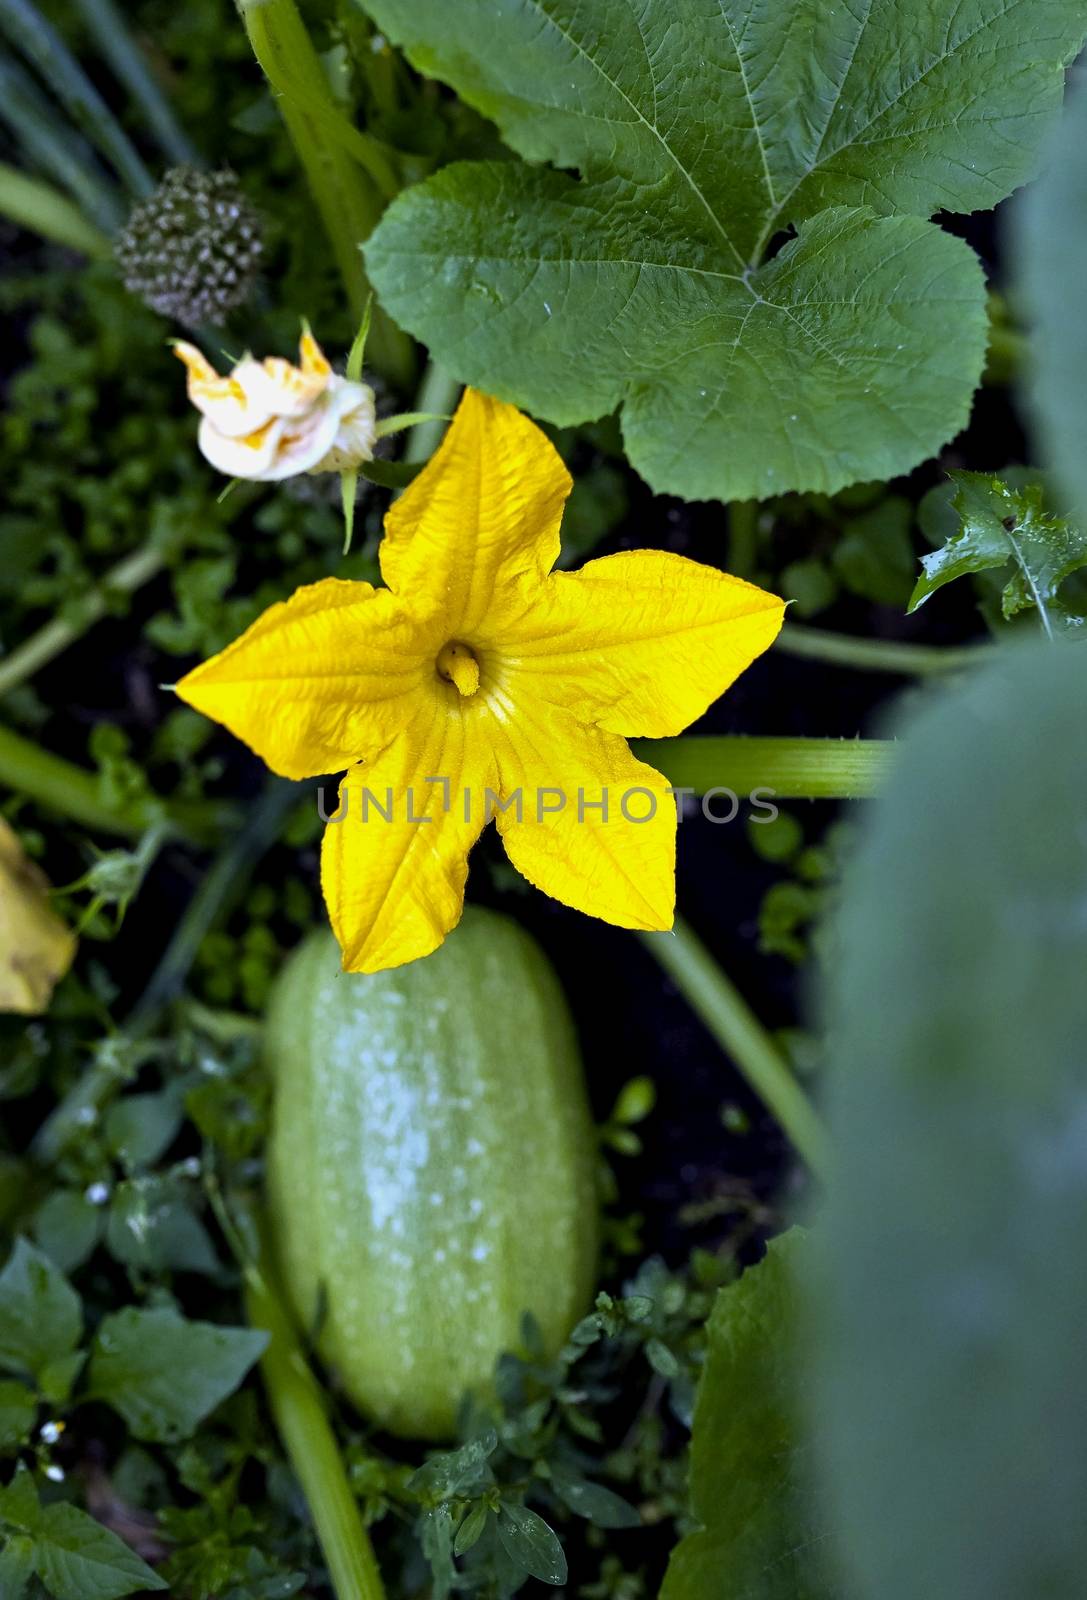 blooms zucchini in the garden, a large yellow flower